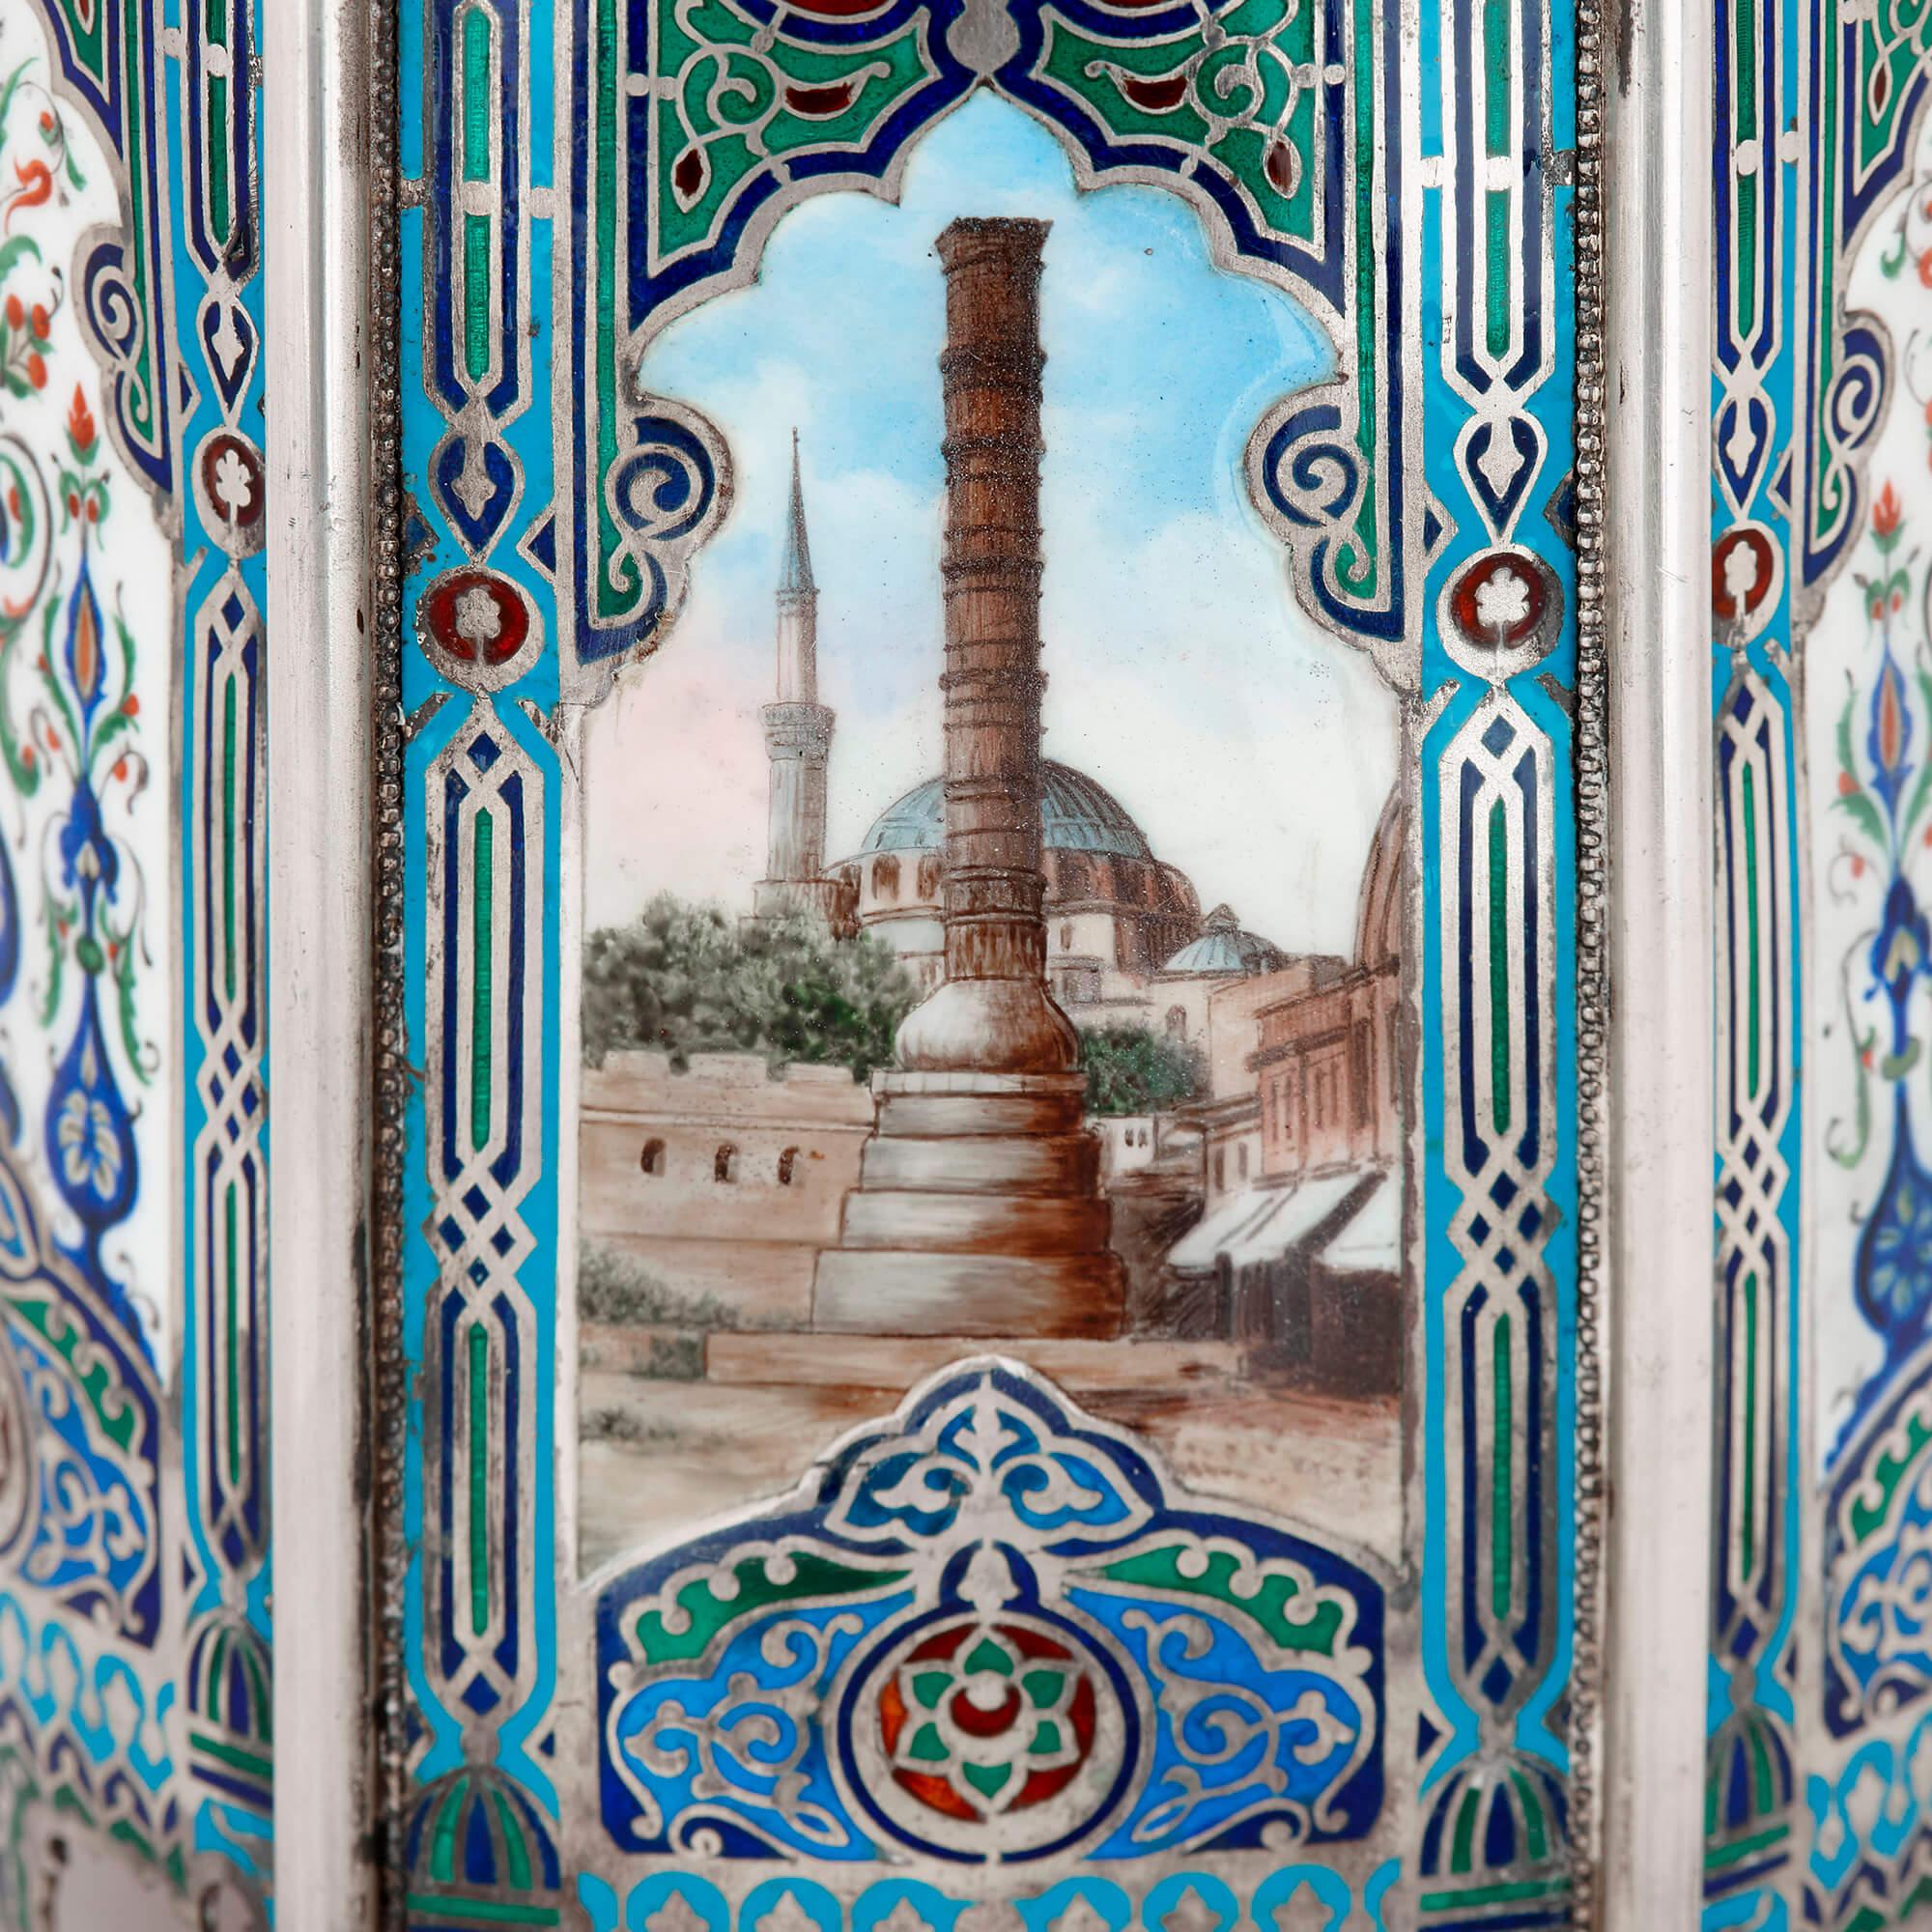 Unusual Russian-Made Silver and Enamel Islamic Vase For Sale 2